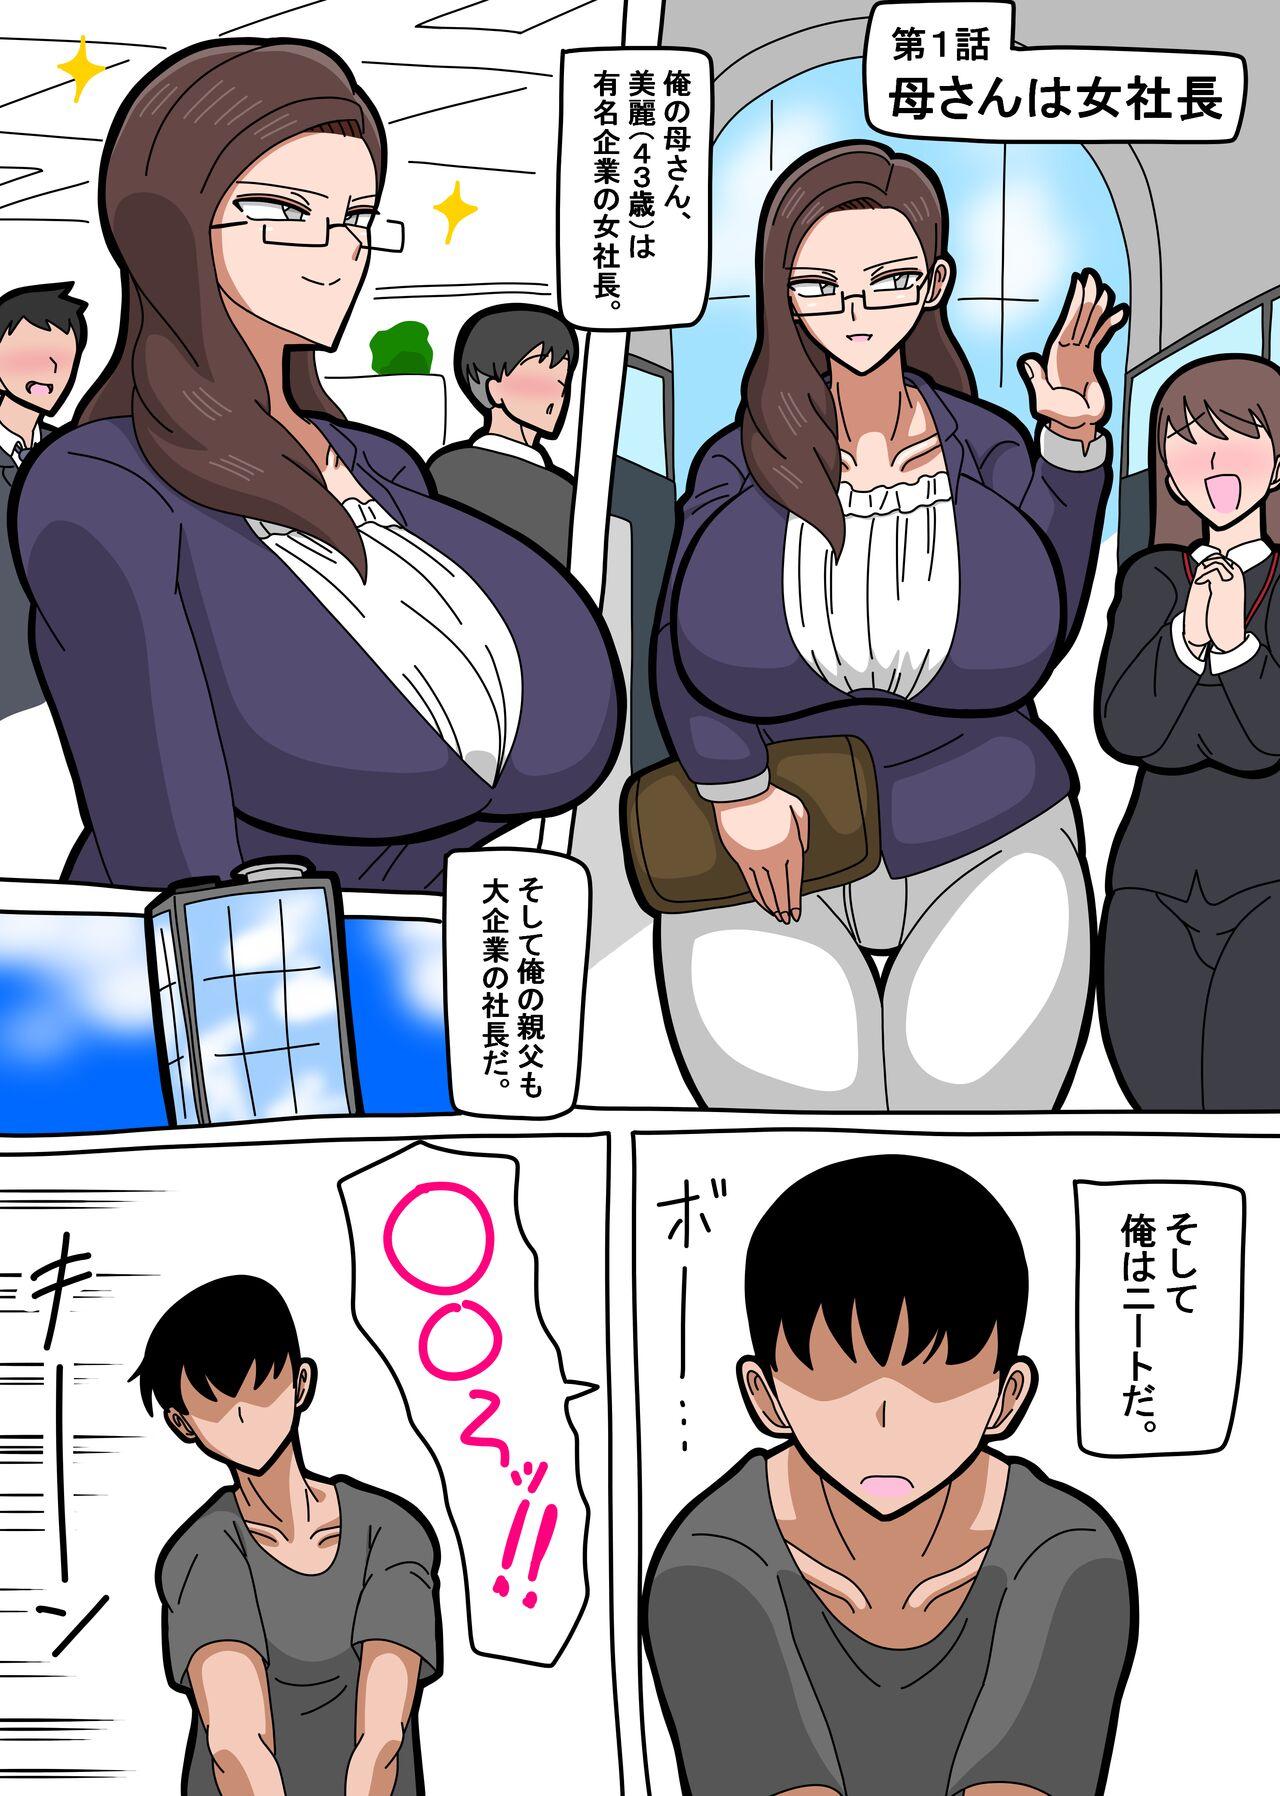 Foot 母さんは女社長 - Original Young - Page 2